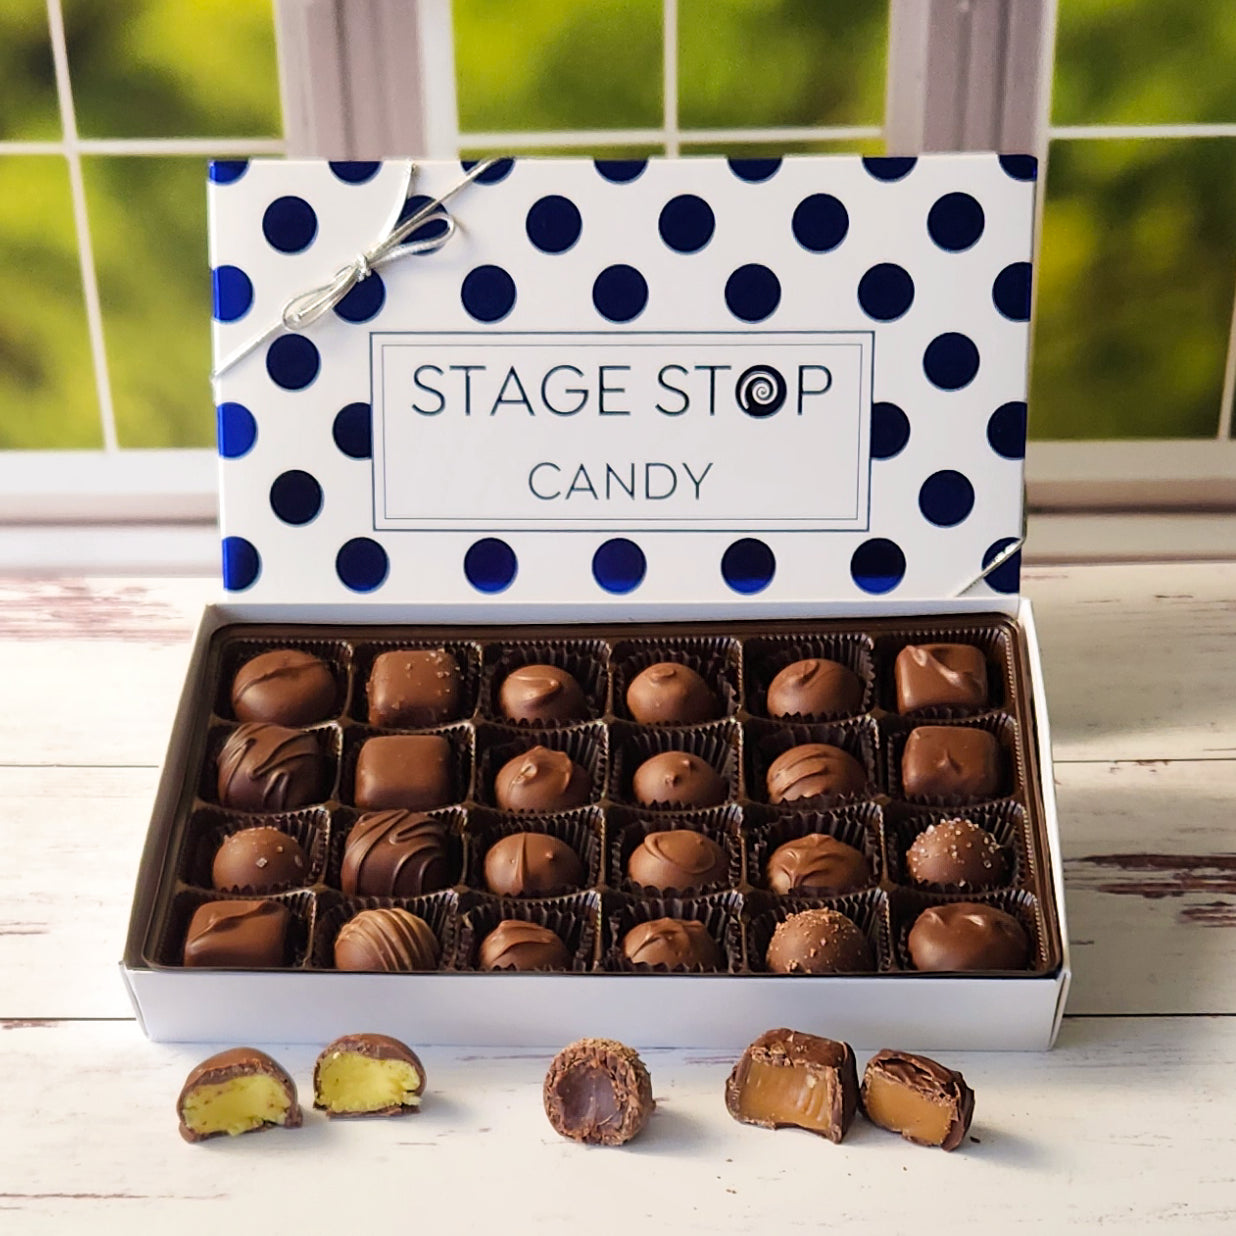 24 mouthwatering pieces of Milk Chocolate creams, caramels, truffles and meltaways fill this box. Our popular assortment makes a great gift for any chocolate lover.